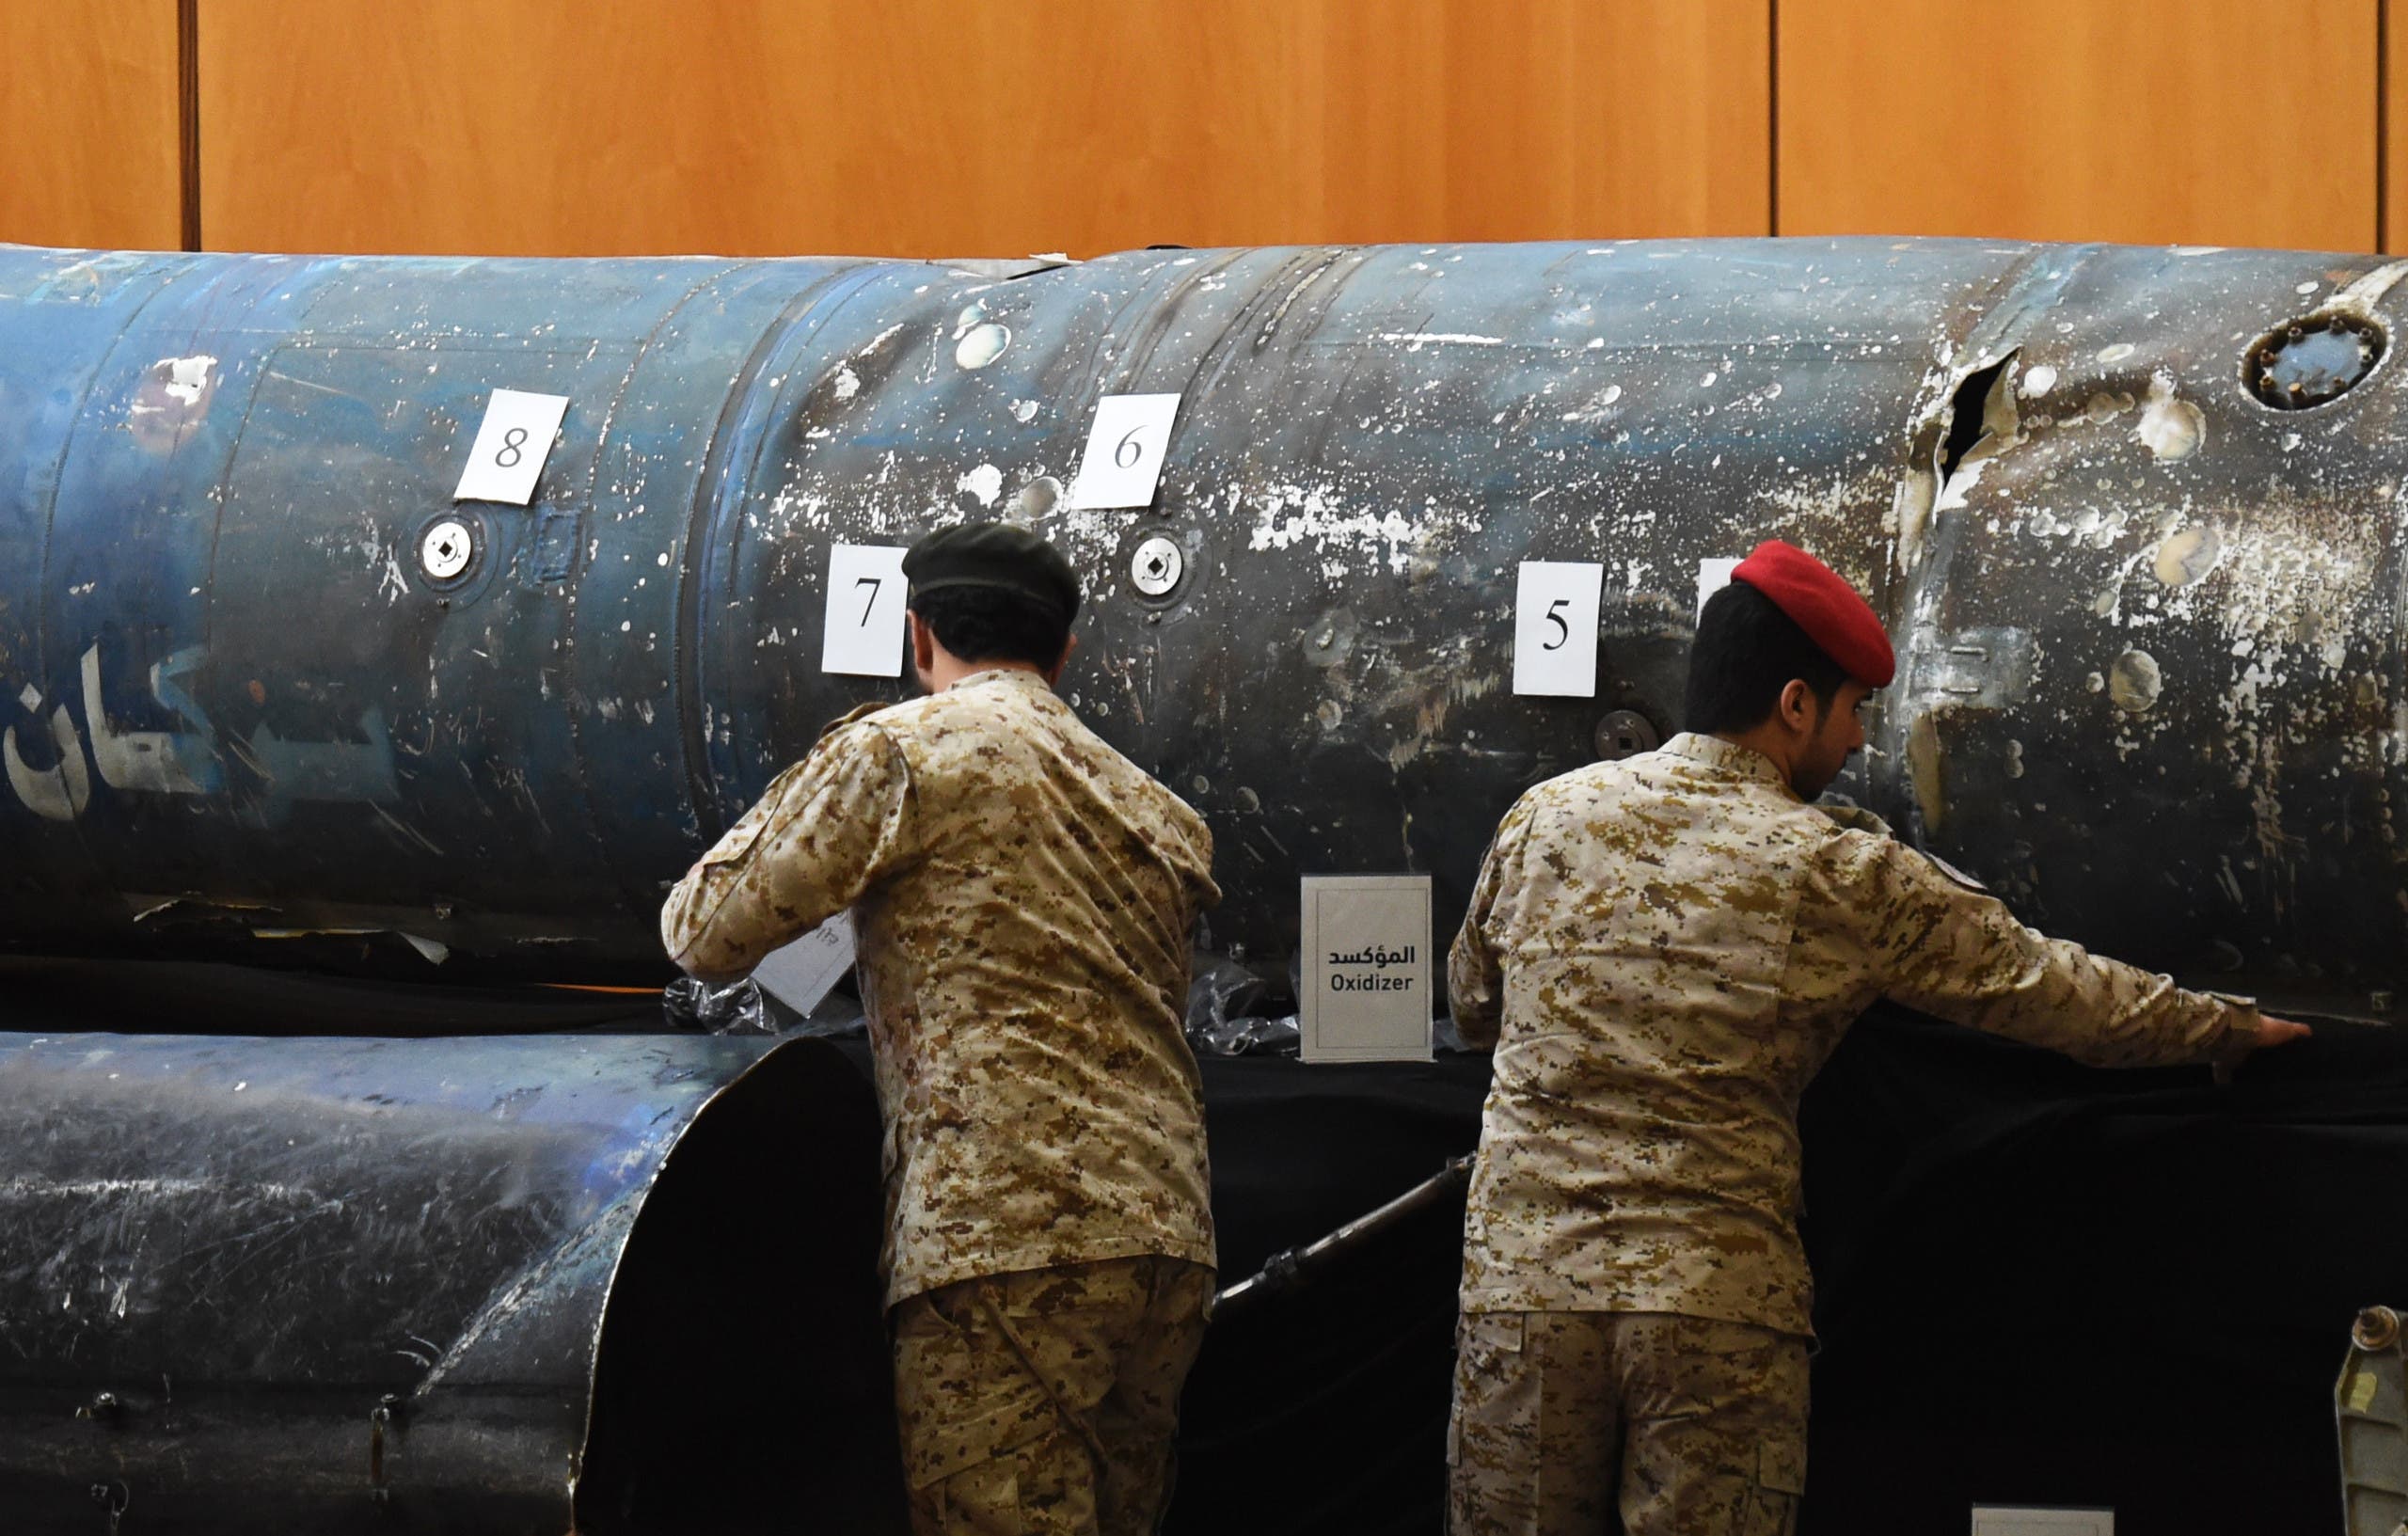 Saudi soldiers reveal the remains of missiles, that a military coalition led by Saudi Arabia claim are Iranian during a press conference at the Armed Forces club in Riyadh on March 26, 2018. A military coalition led by Saudi Arabia threatened retaliation against Iran, accusing the Shiite power of being behind multiple Yemeni rebel missile attacks on the kingdom. FAYEZ NURELDINE / AFP